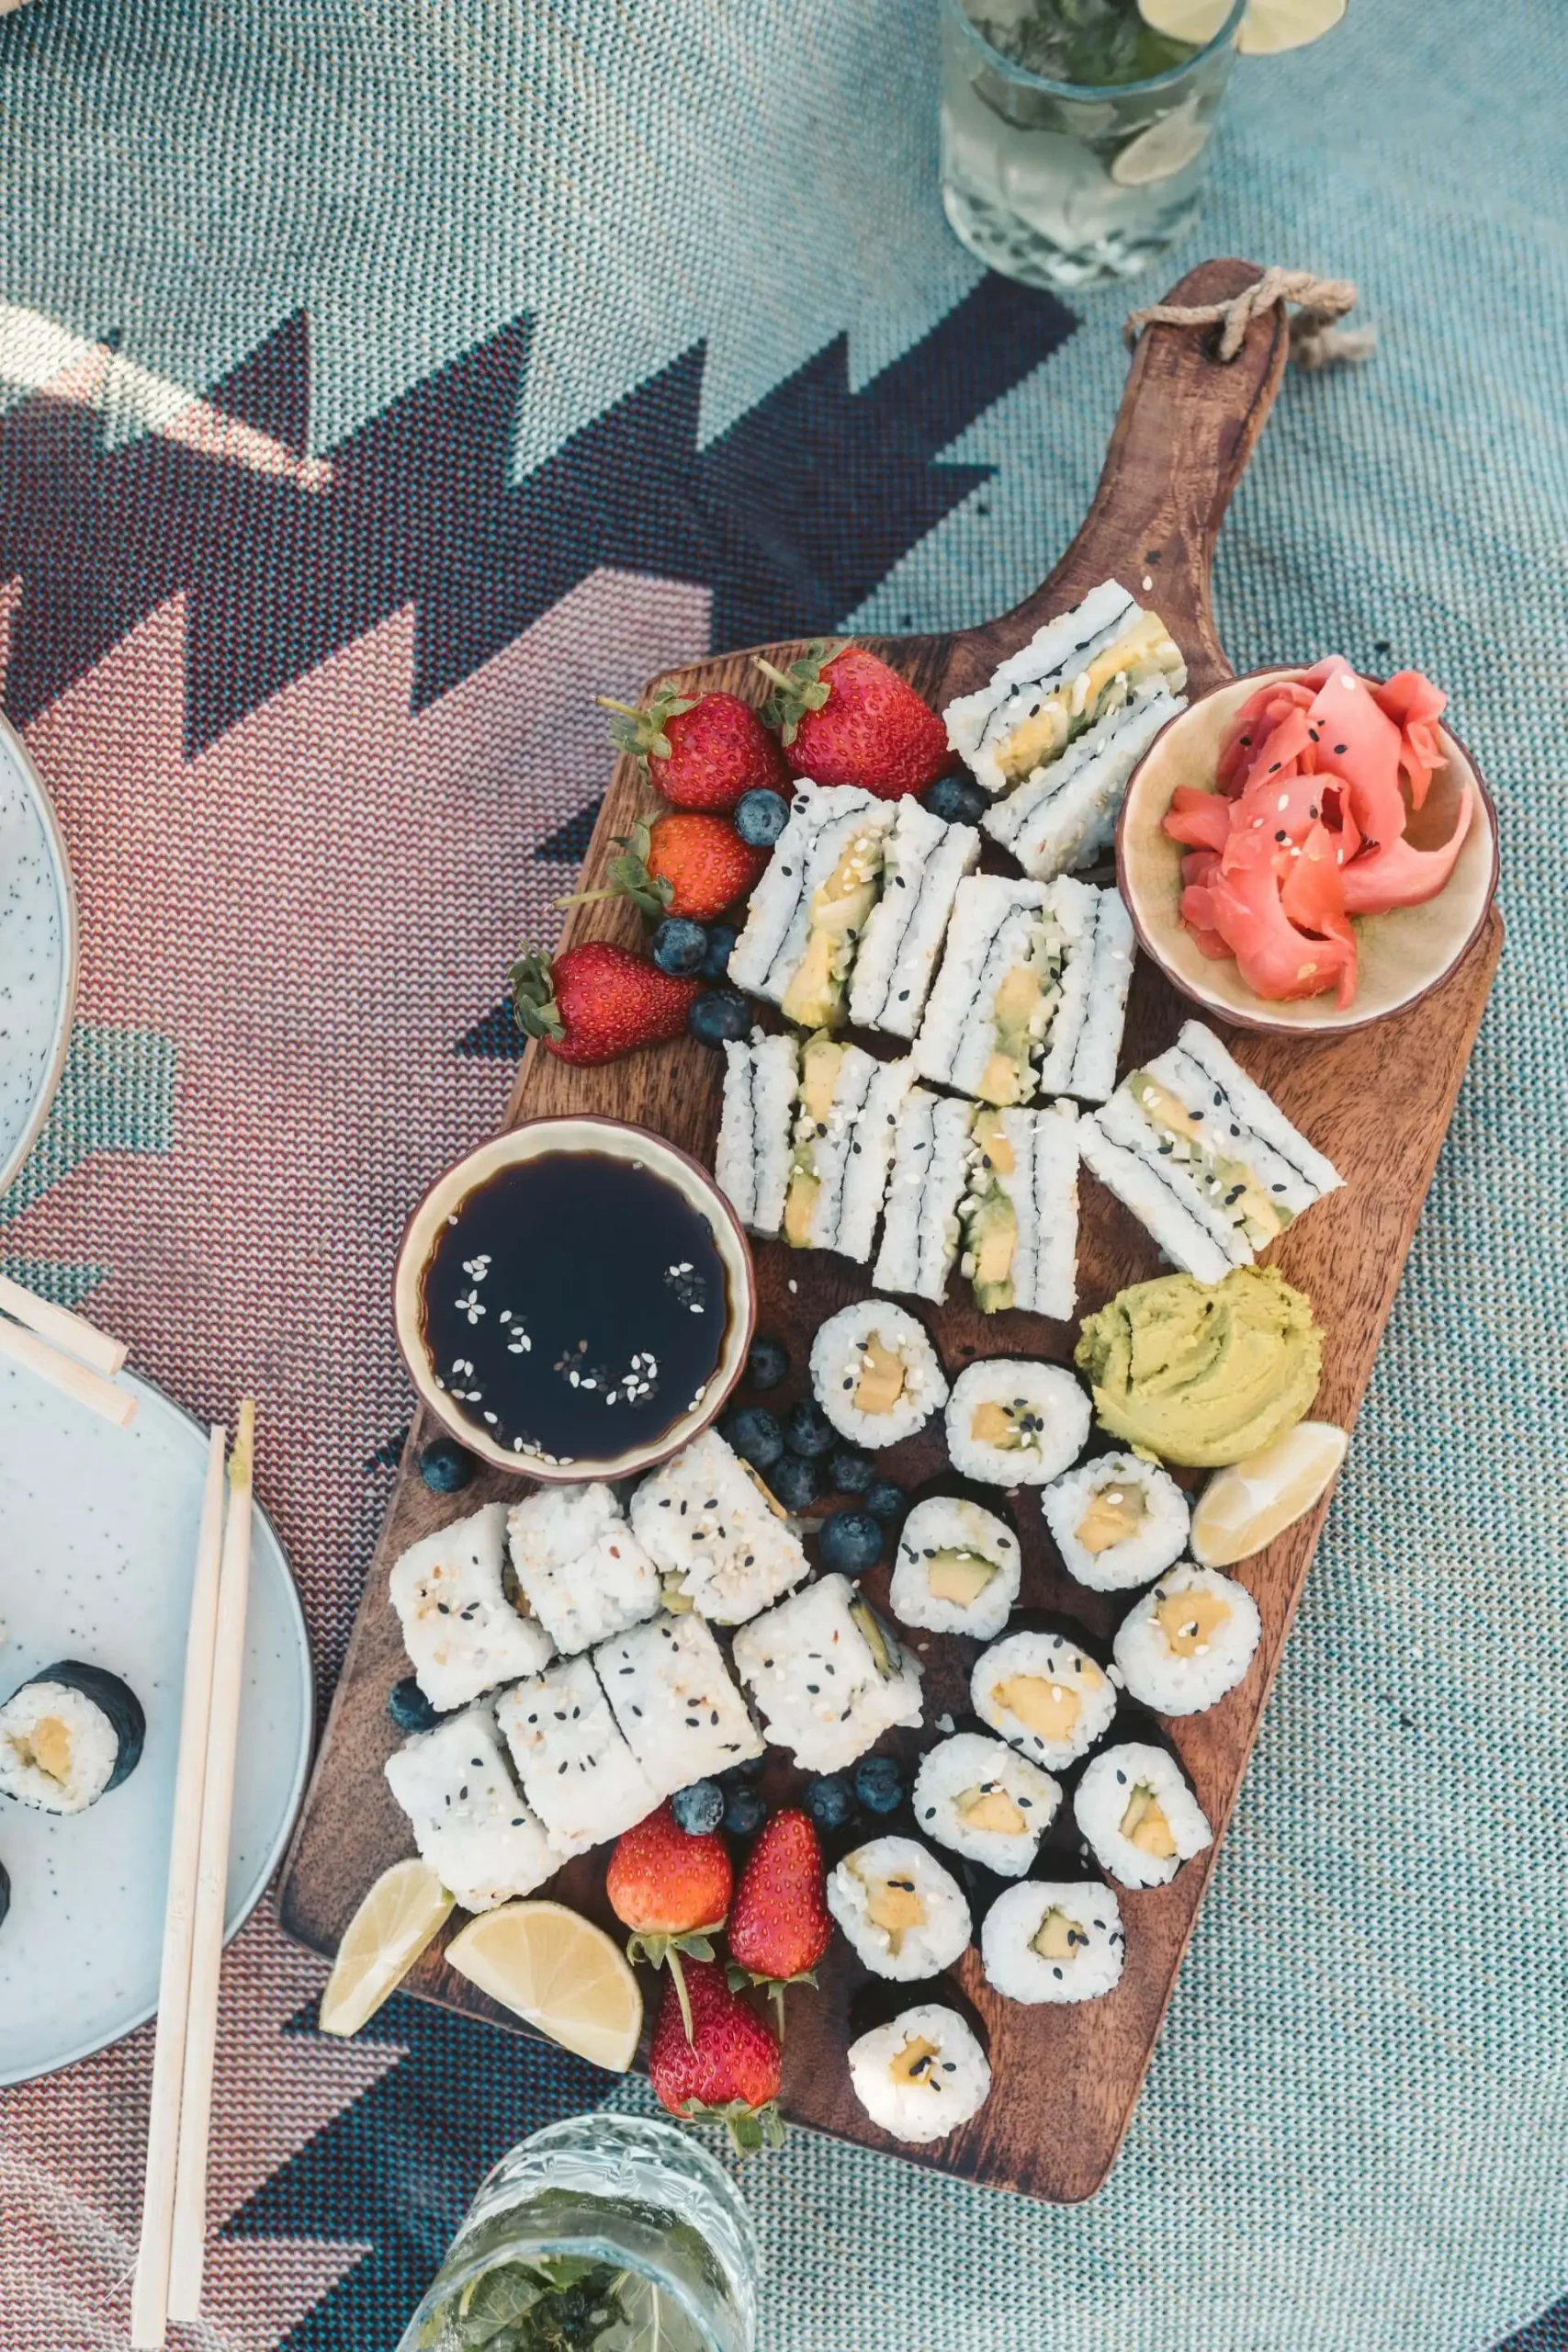 Sushi Catering Melbourne